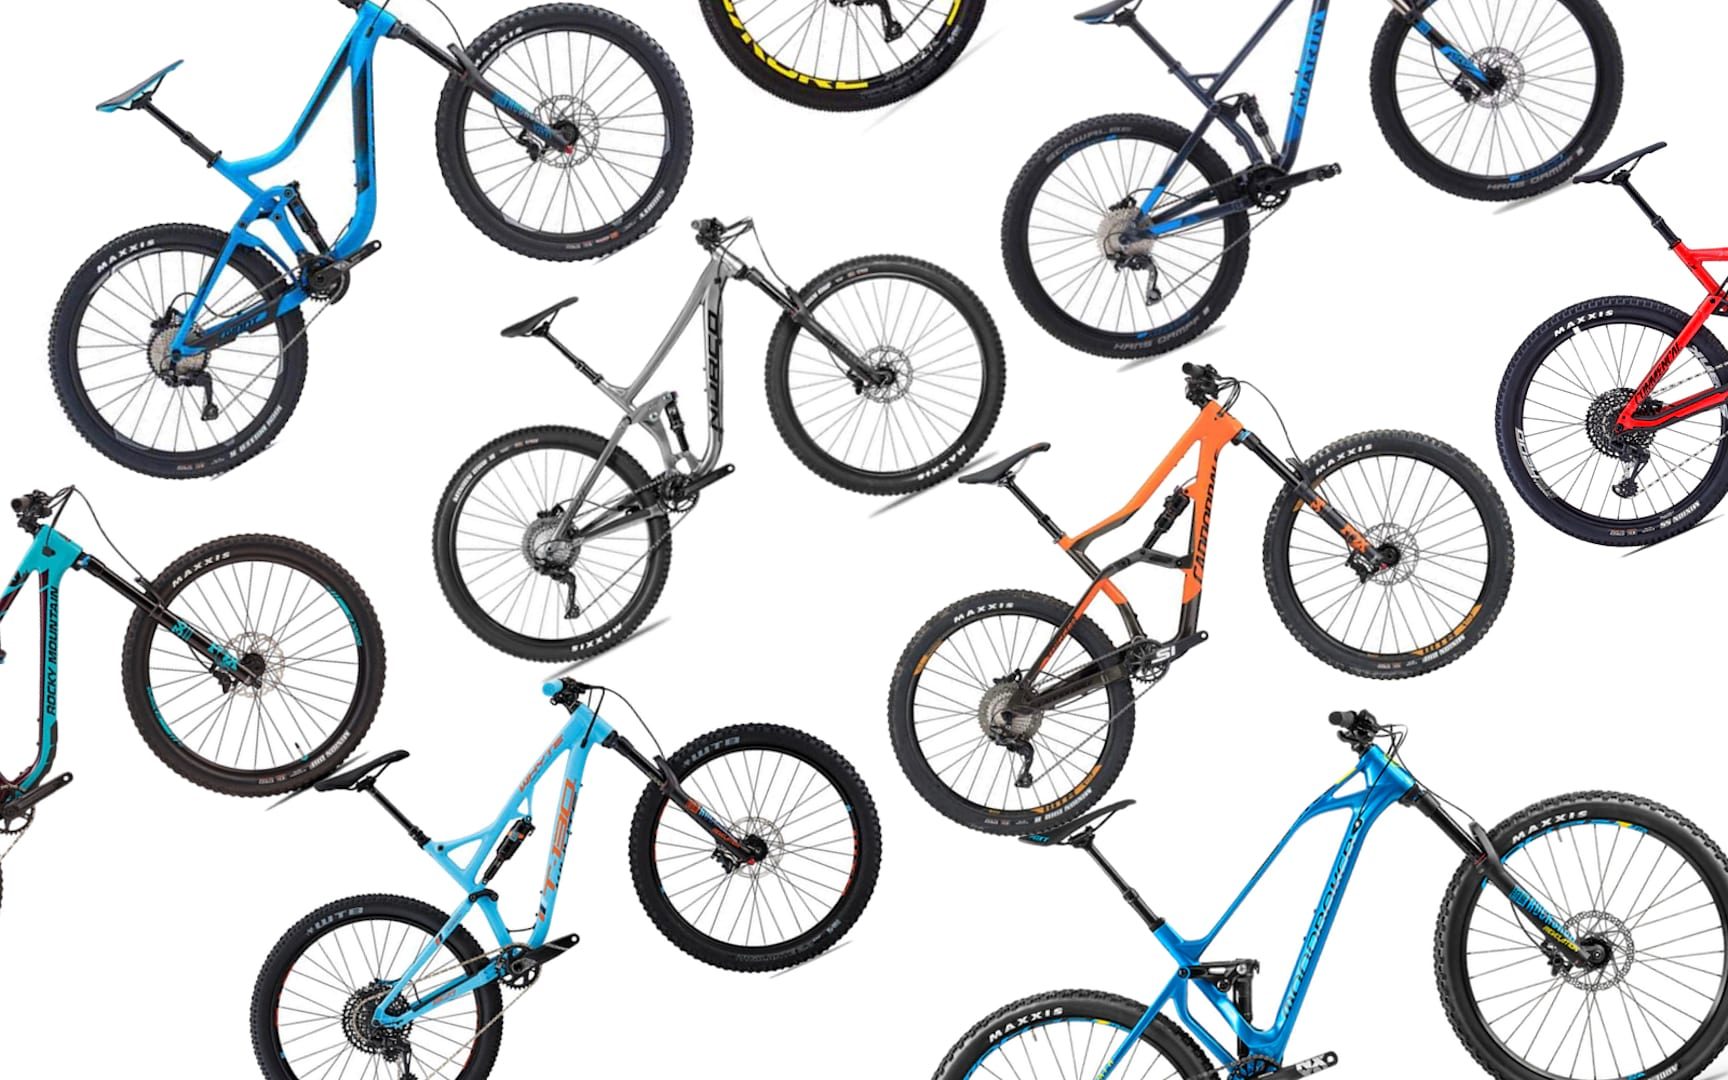 Top 10 2018 Black Friday Mountain Bike Deals – Save As Much As £1500 On 2018 Bikes ...1728 x 1080